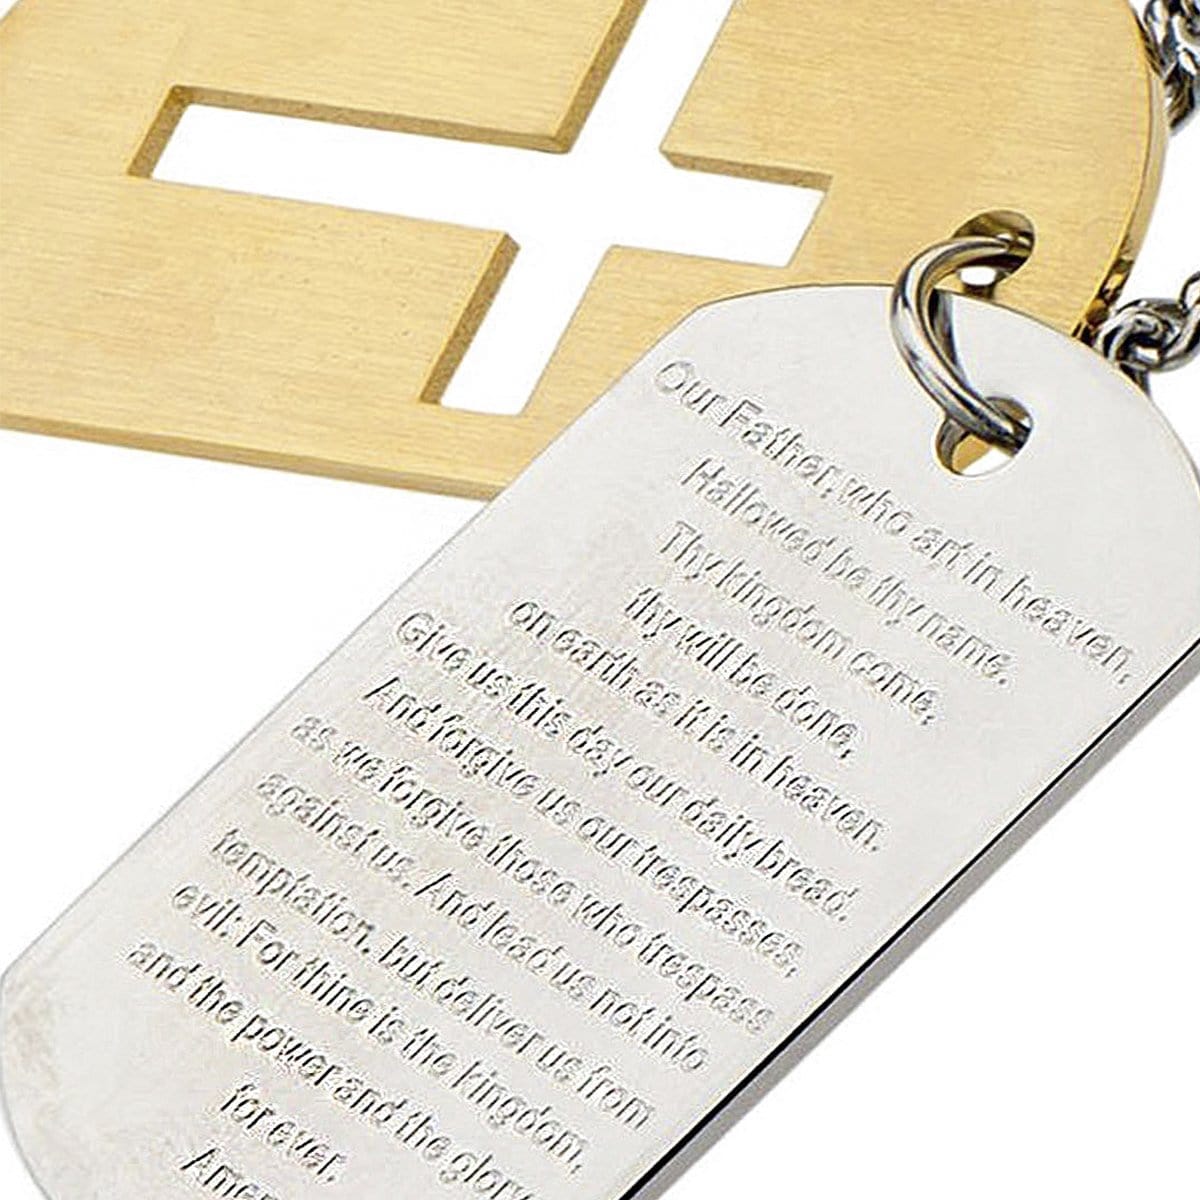 INOX JEWELRY Pendants Golden Tone and Silver Tone Stainless Steel Religious Cross with Prayer Double Plate ID Tag SSP6972